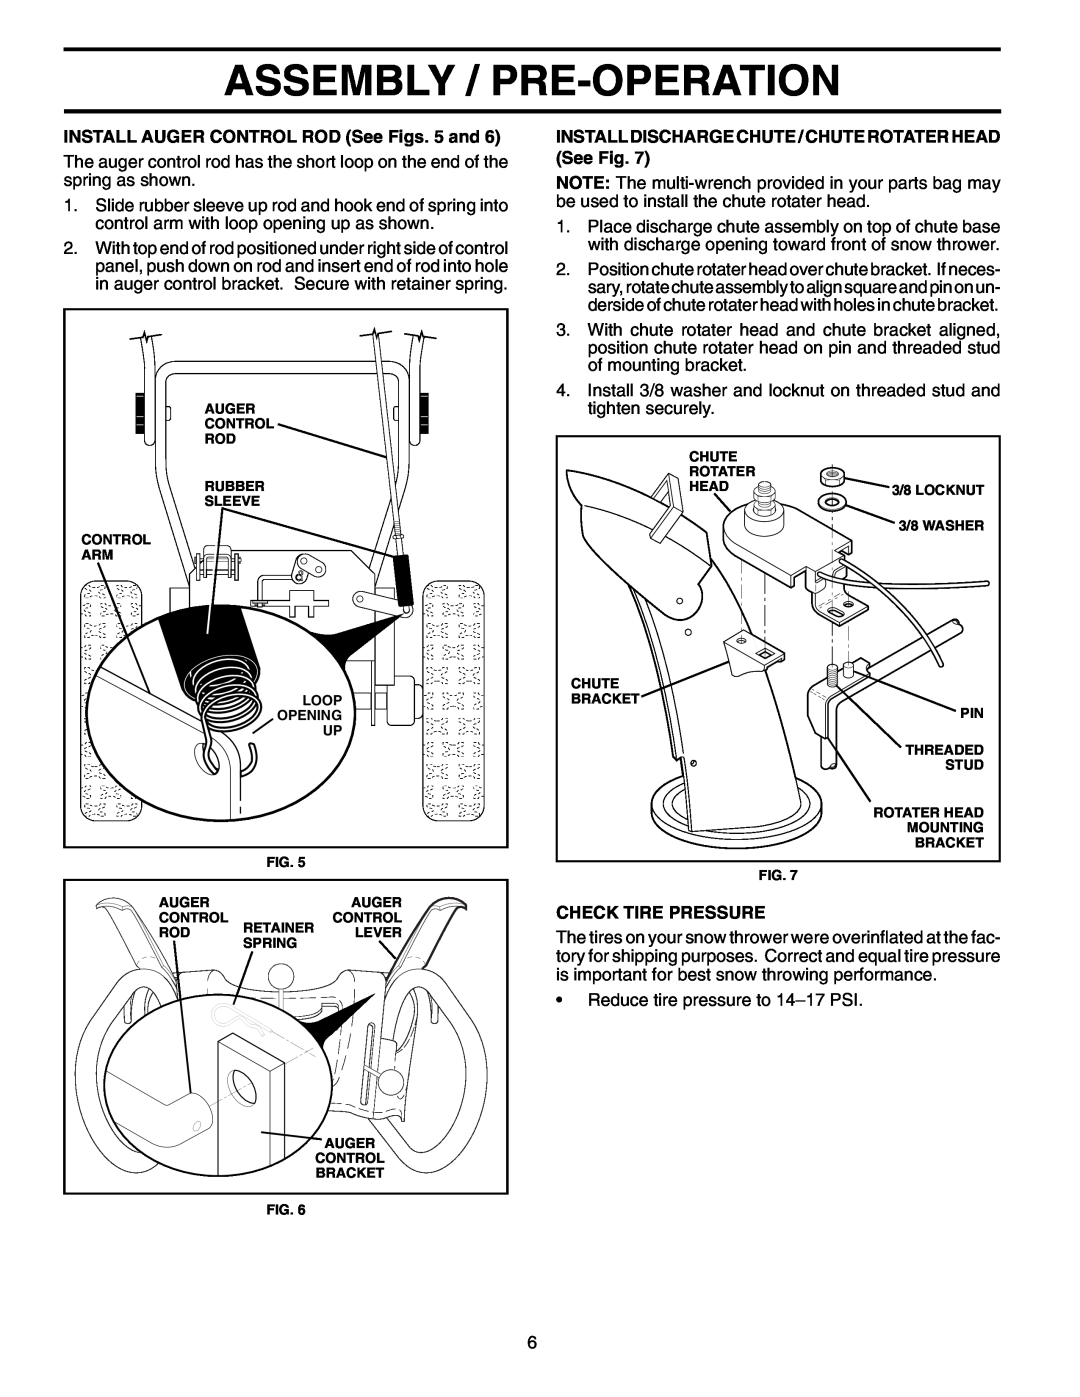 Poulan 199434 owner manual Assembly / Pre-Operation, INSTALL AUGER CONTROL ROD See Figs. 5 and, Check Tire Pressure 